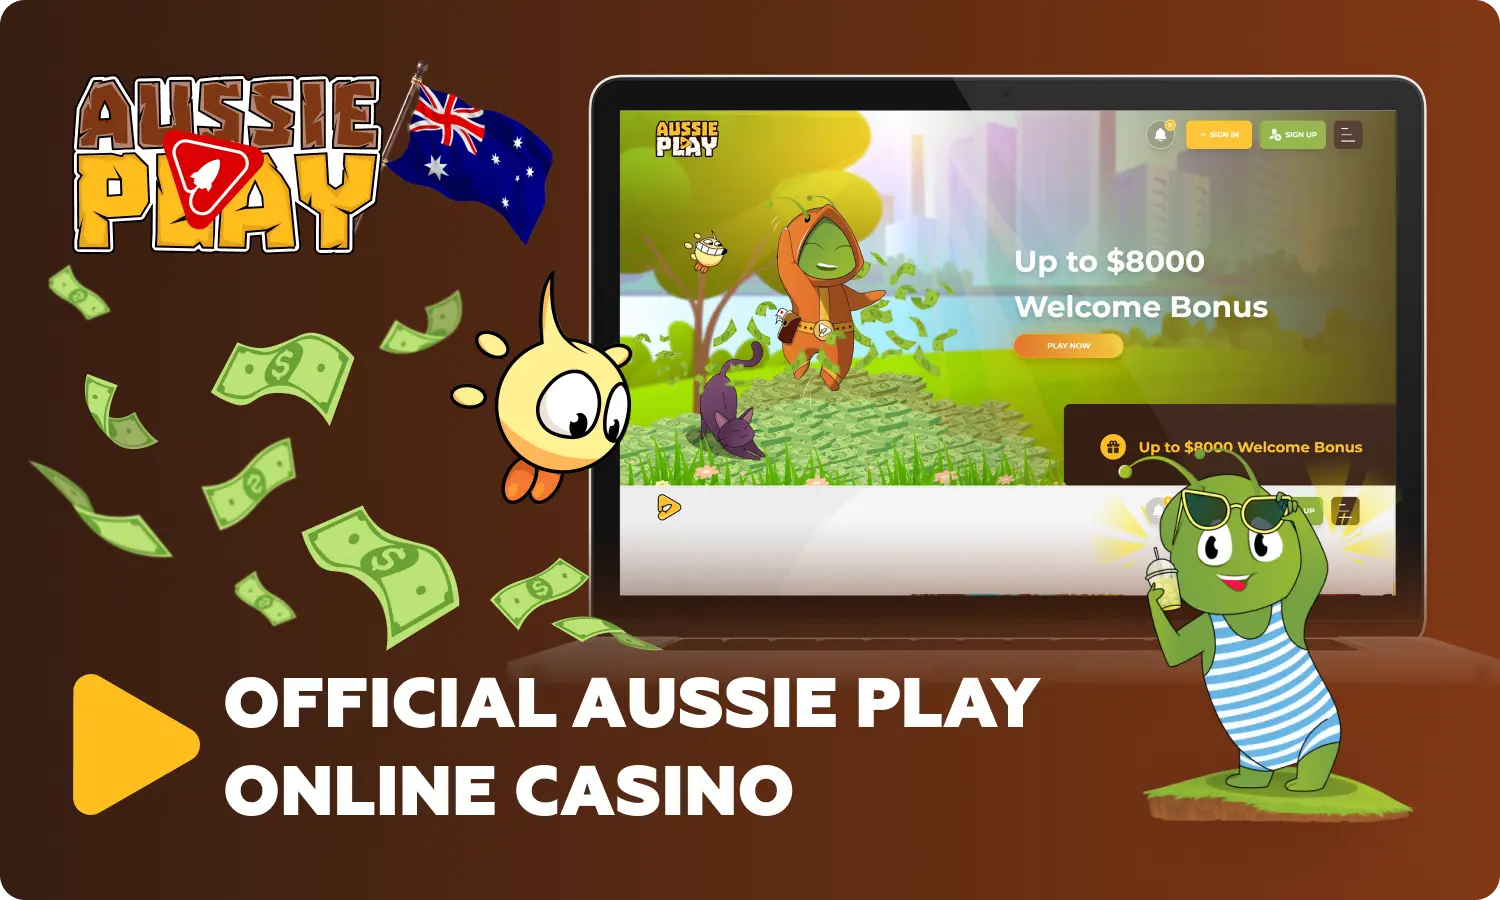 Aussie Play Casino is available for Australian gamblers